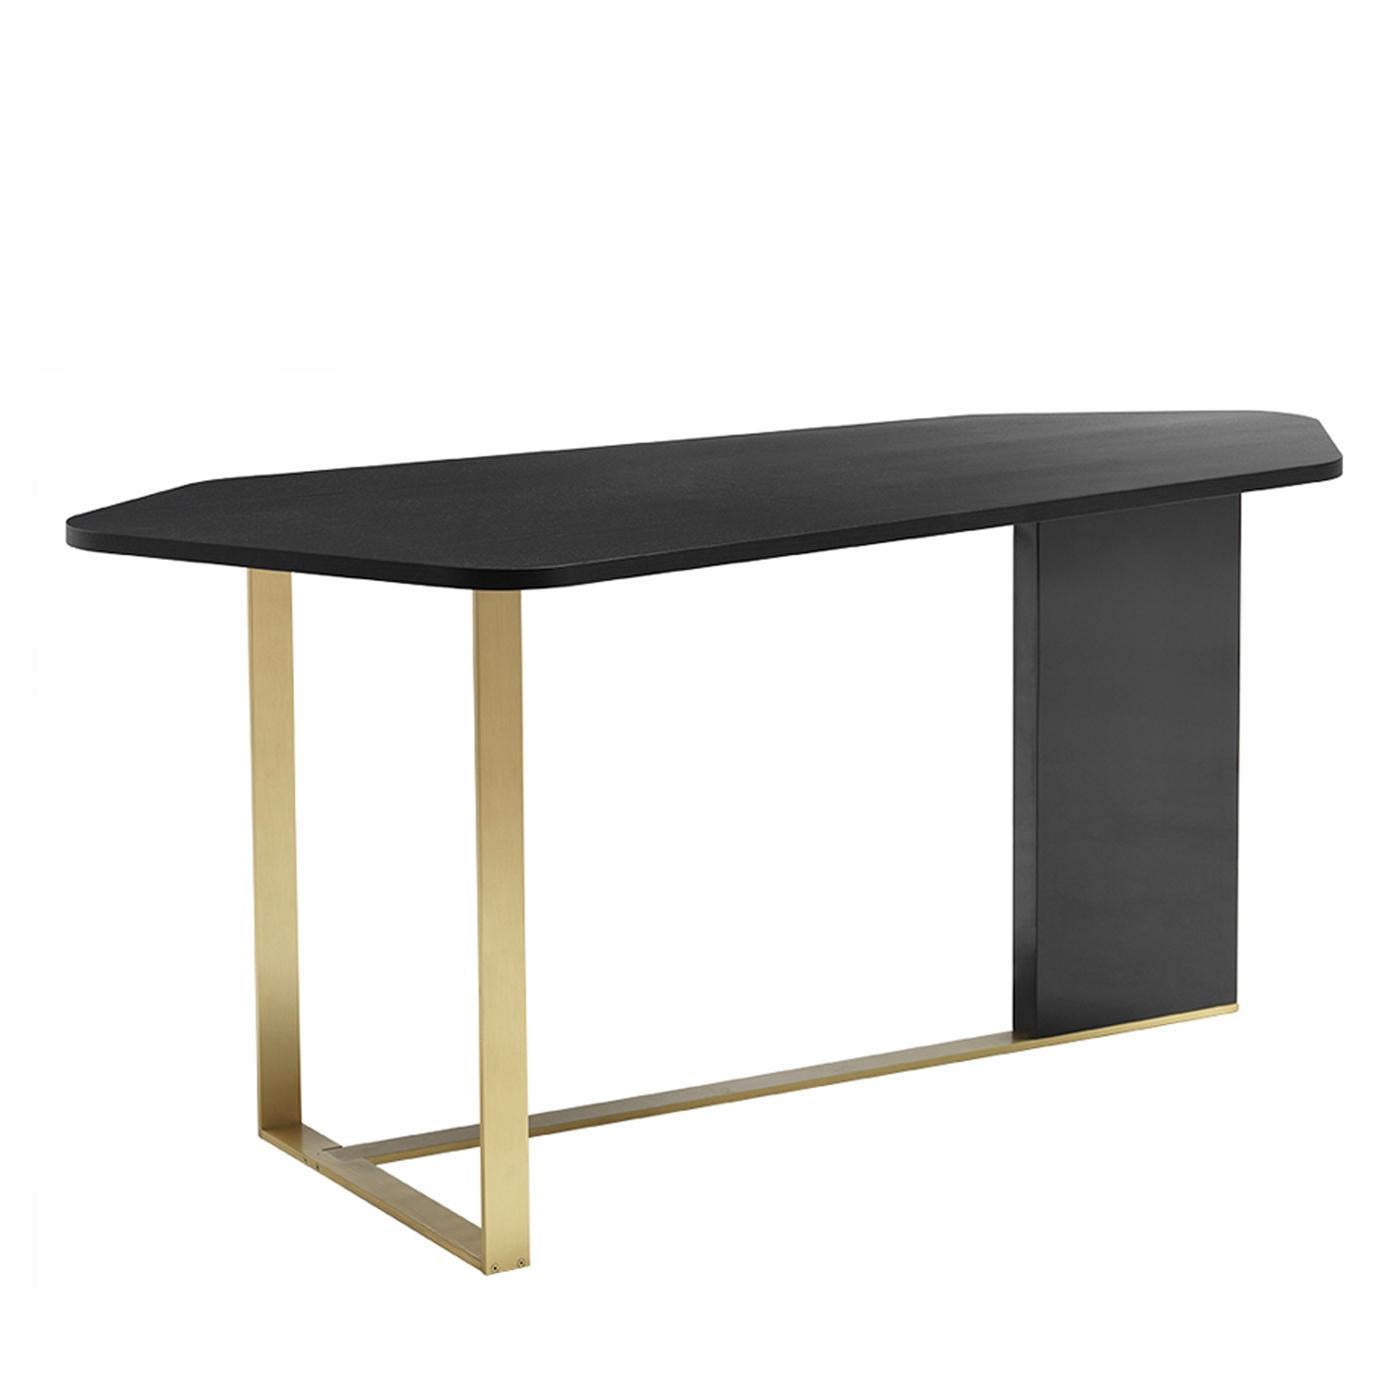 Clean lines and a unique shape are the characterizing aspects of the Aimo writing desk. With a structure in a satin brass finish, a base section in smoke gloss lacquered plywood and top in 4 cm plywood with open pore matt black lacquer 10/10 ash